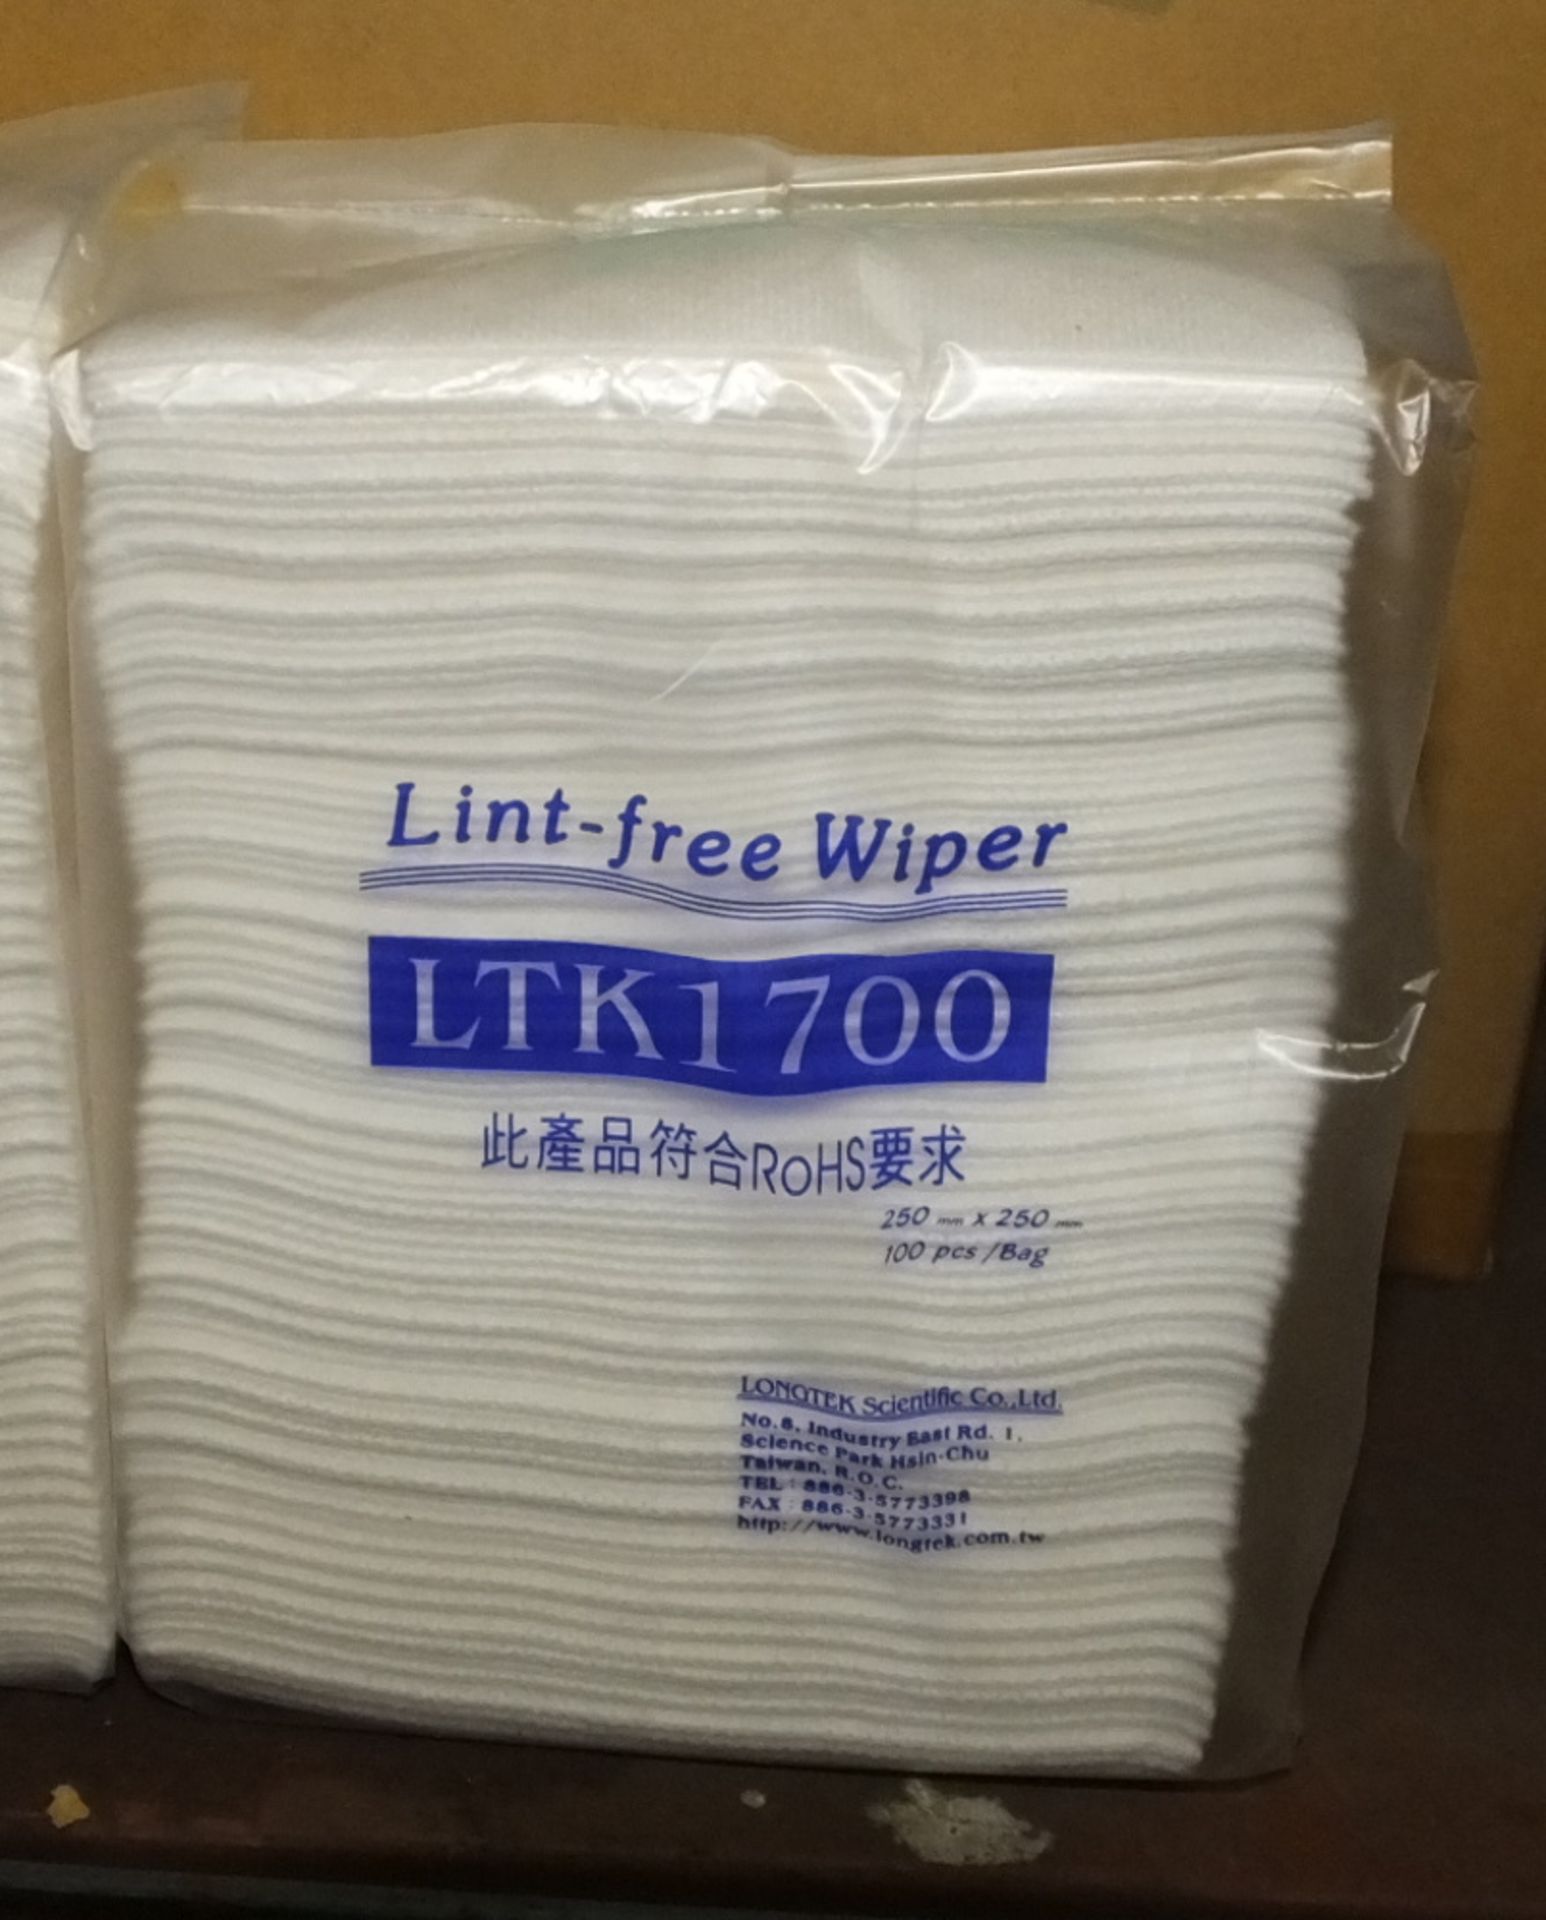 Non-Woven Cleanroom Wipers - 30 bags per box - 100 pieces per bag - 1 box - Image 2 of 2